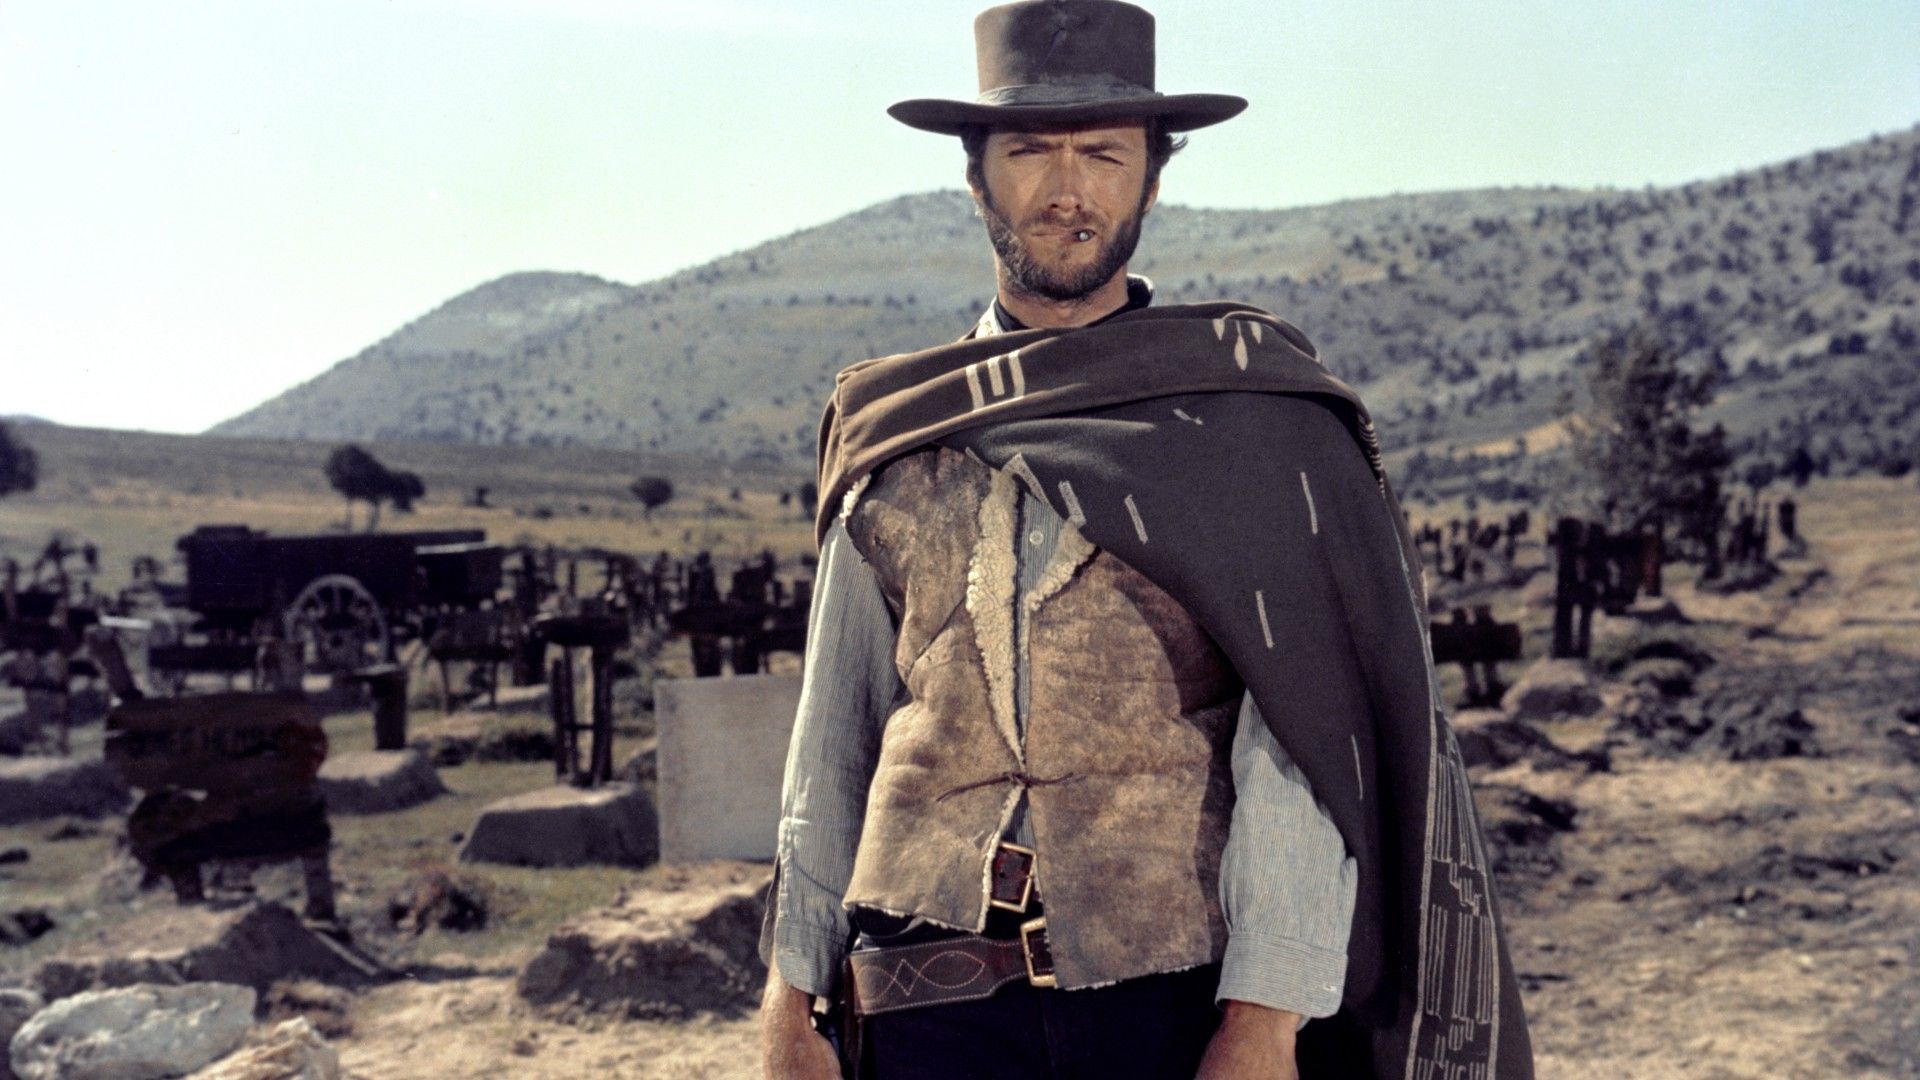 Clint Eastwood with a cigarette in his mouth standing in a desert in The good, the Bad and the Ugly